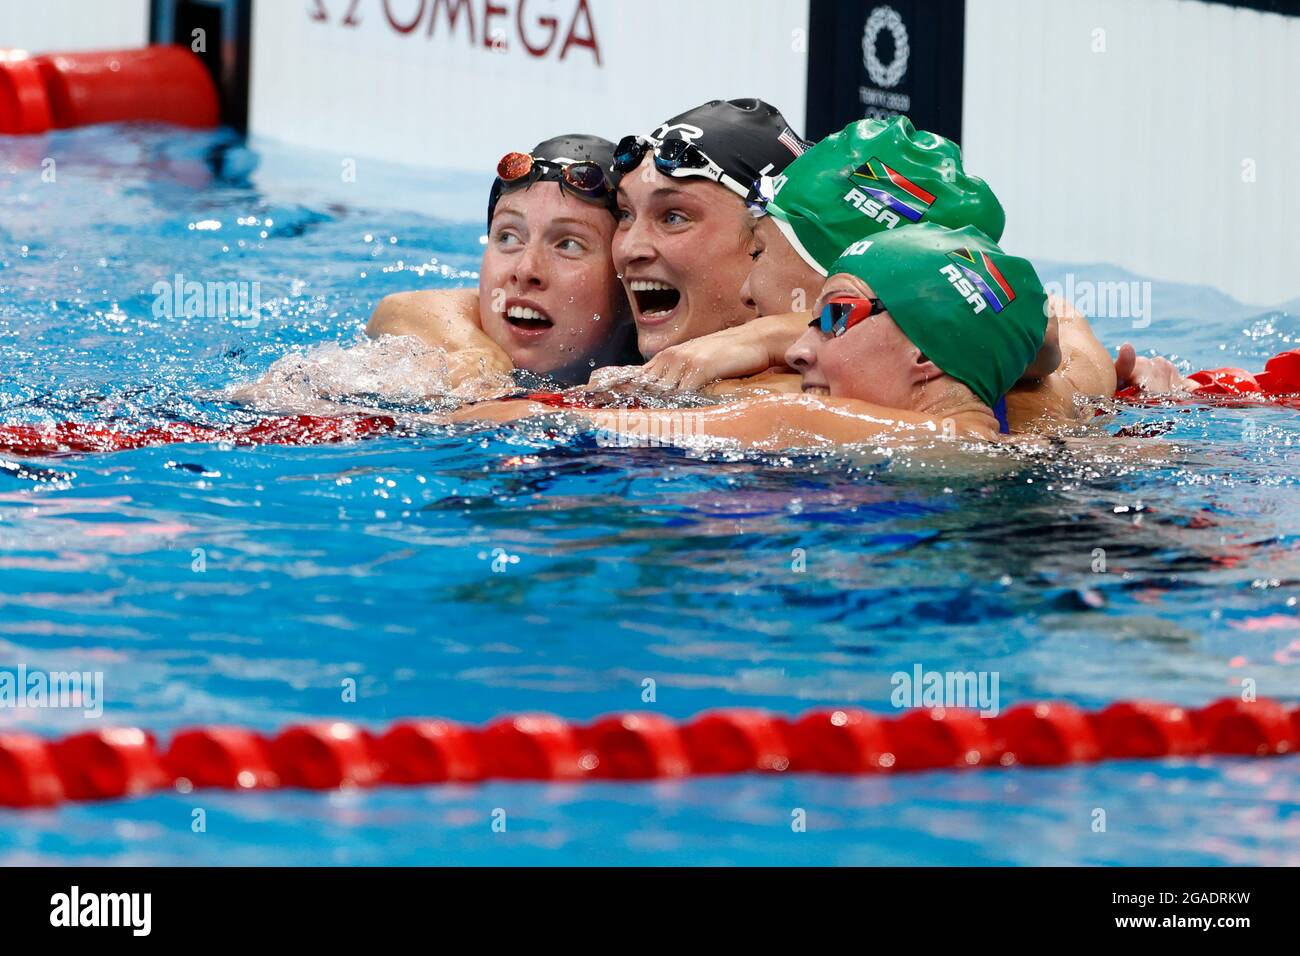 left to right Lilly KING (USA), 2nd place, silver medal, silver medal, silver medalist, silver medalist, Annie LAZOR (USA), 3rd place, bronze medal, bronze medal, bronze medalist, bronze medalist, Tatjana SCHOENMAKER (RSA), winner, winner, Olympic champion, 1st place, gold medal, gold medalist, Olympic champion, gold medalist, Kaylene CORBETT (RSA), cheers at the finish, jubilation, cheering, joy, cheers, winner, winner, Olympic champion, 1st place, gold medal, Gold Medalist, Olympic champion, Gold Medalist, Swimming, Women's 200m Breaststroke Final, Swimming Women's 200m Breaststroke Final, Stock Photo